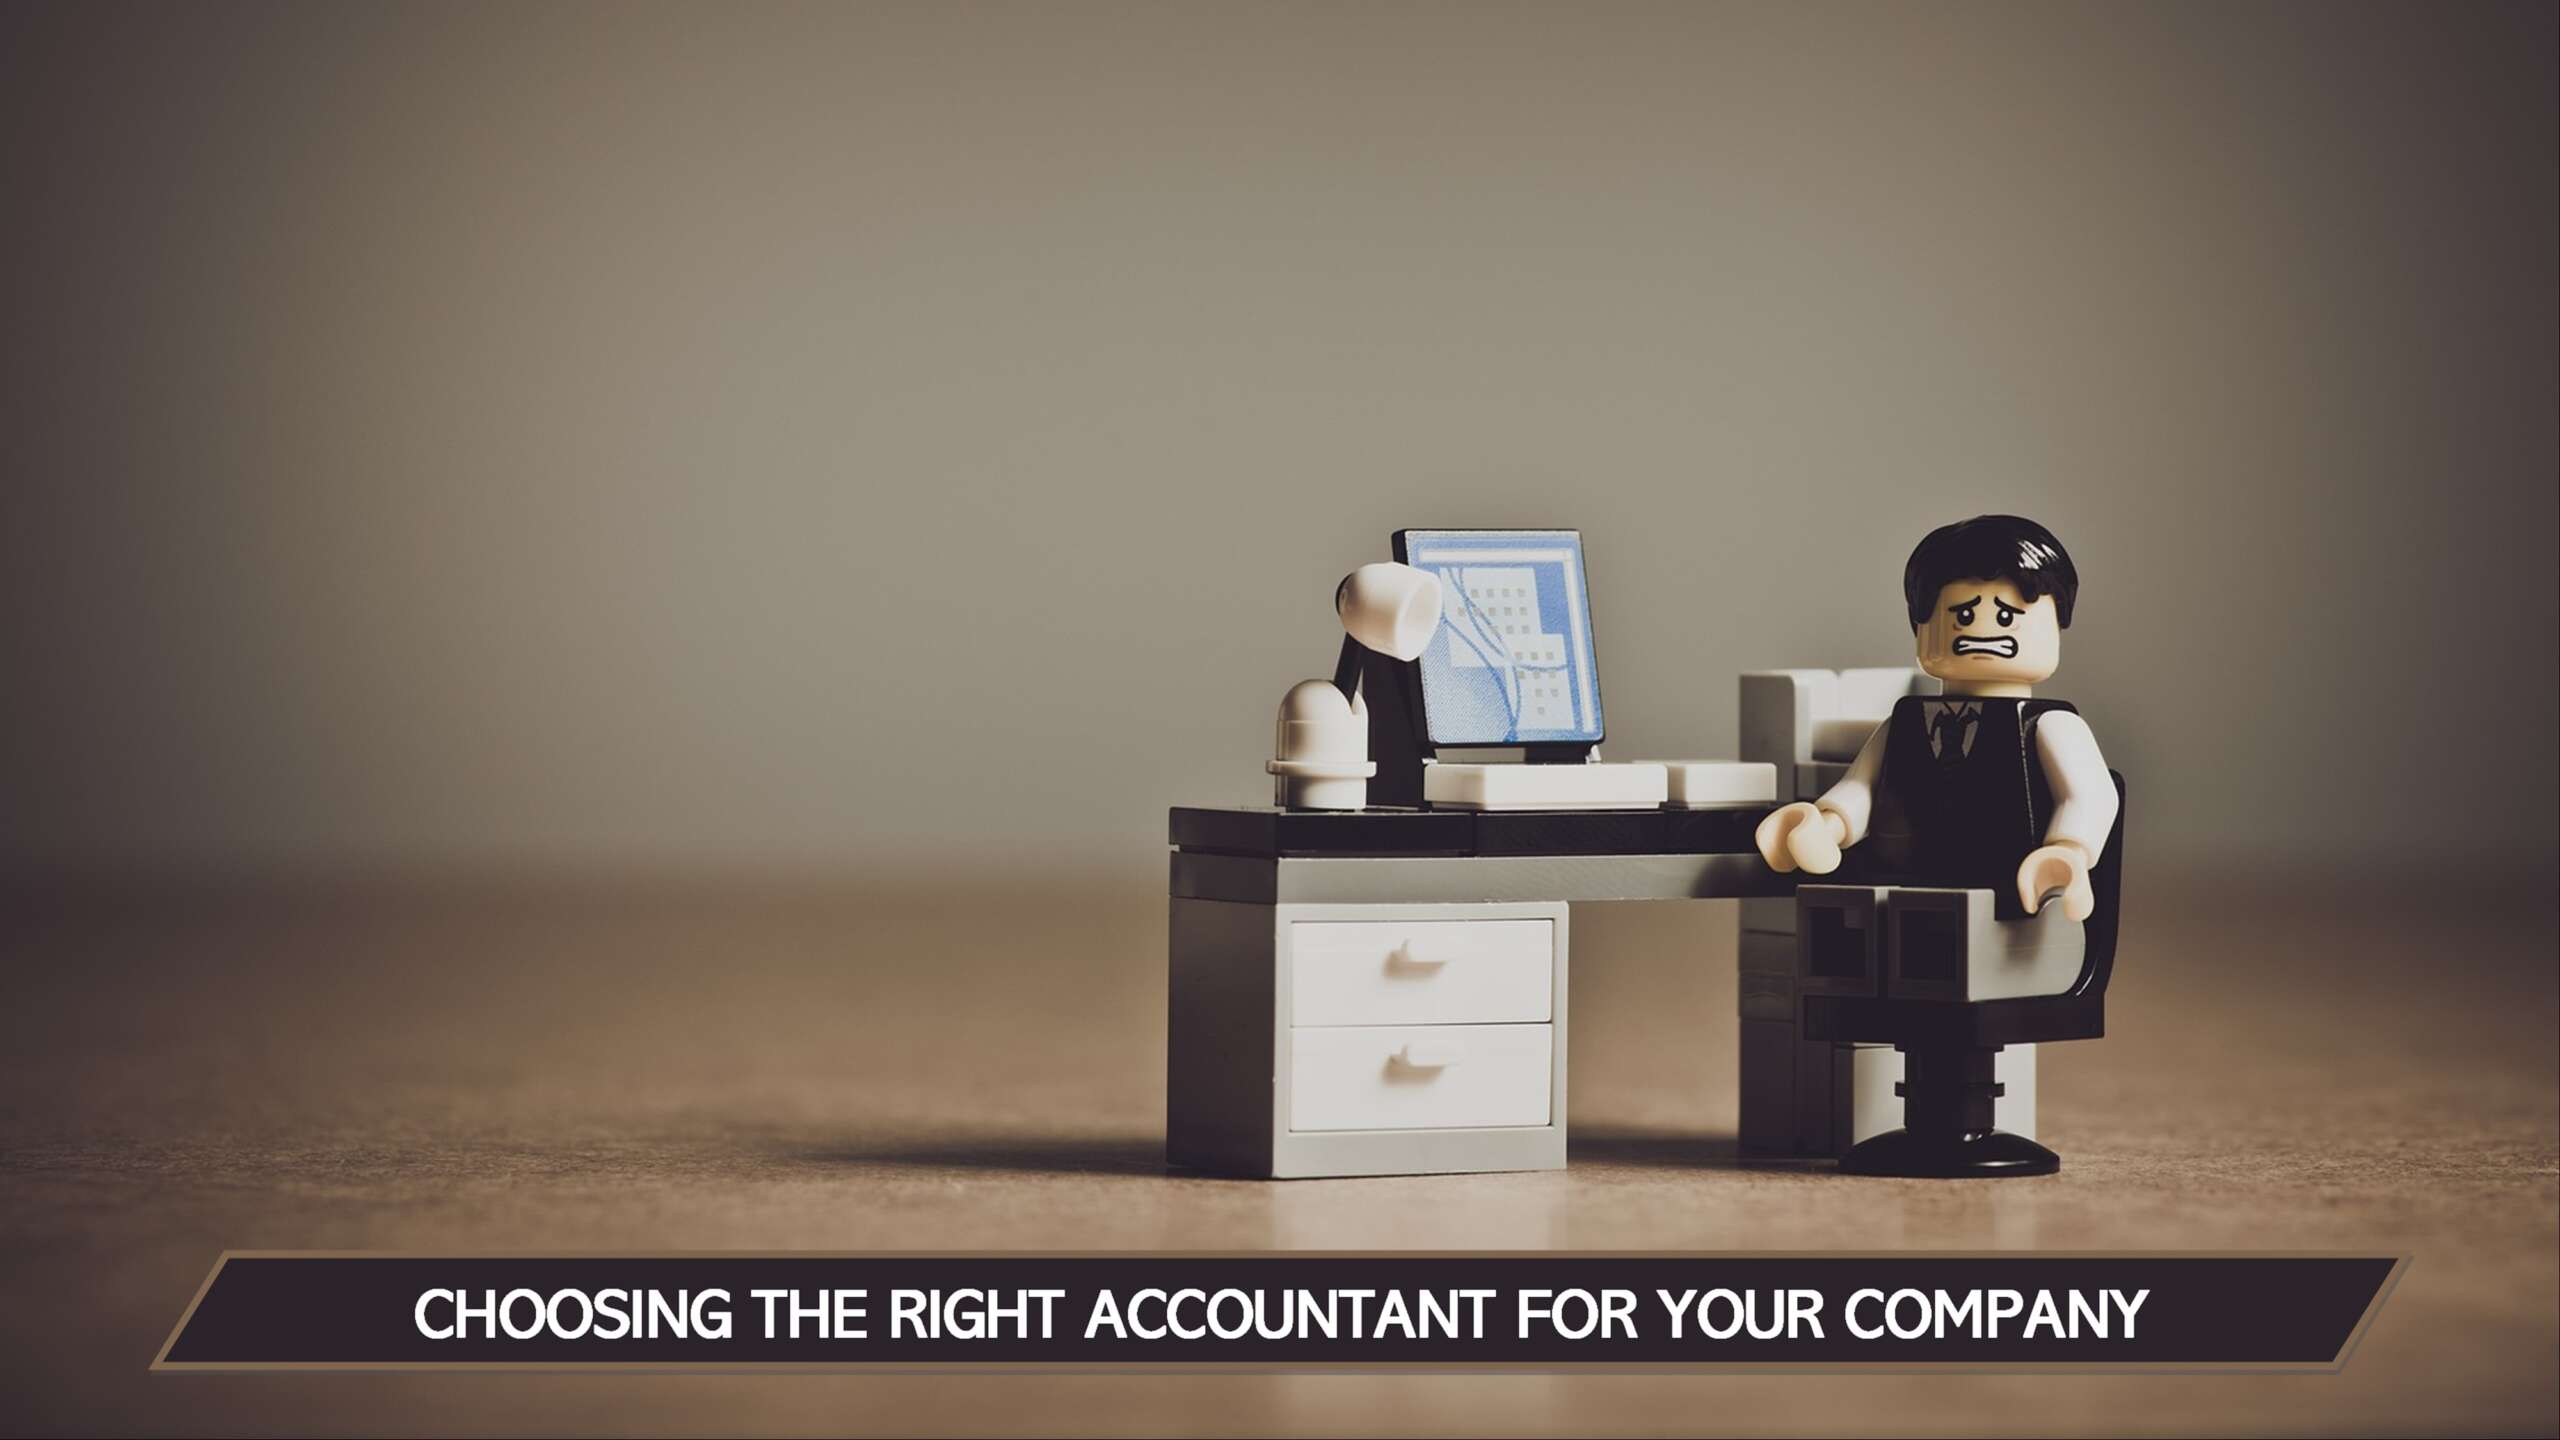 Choosing the right accountant for your company